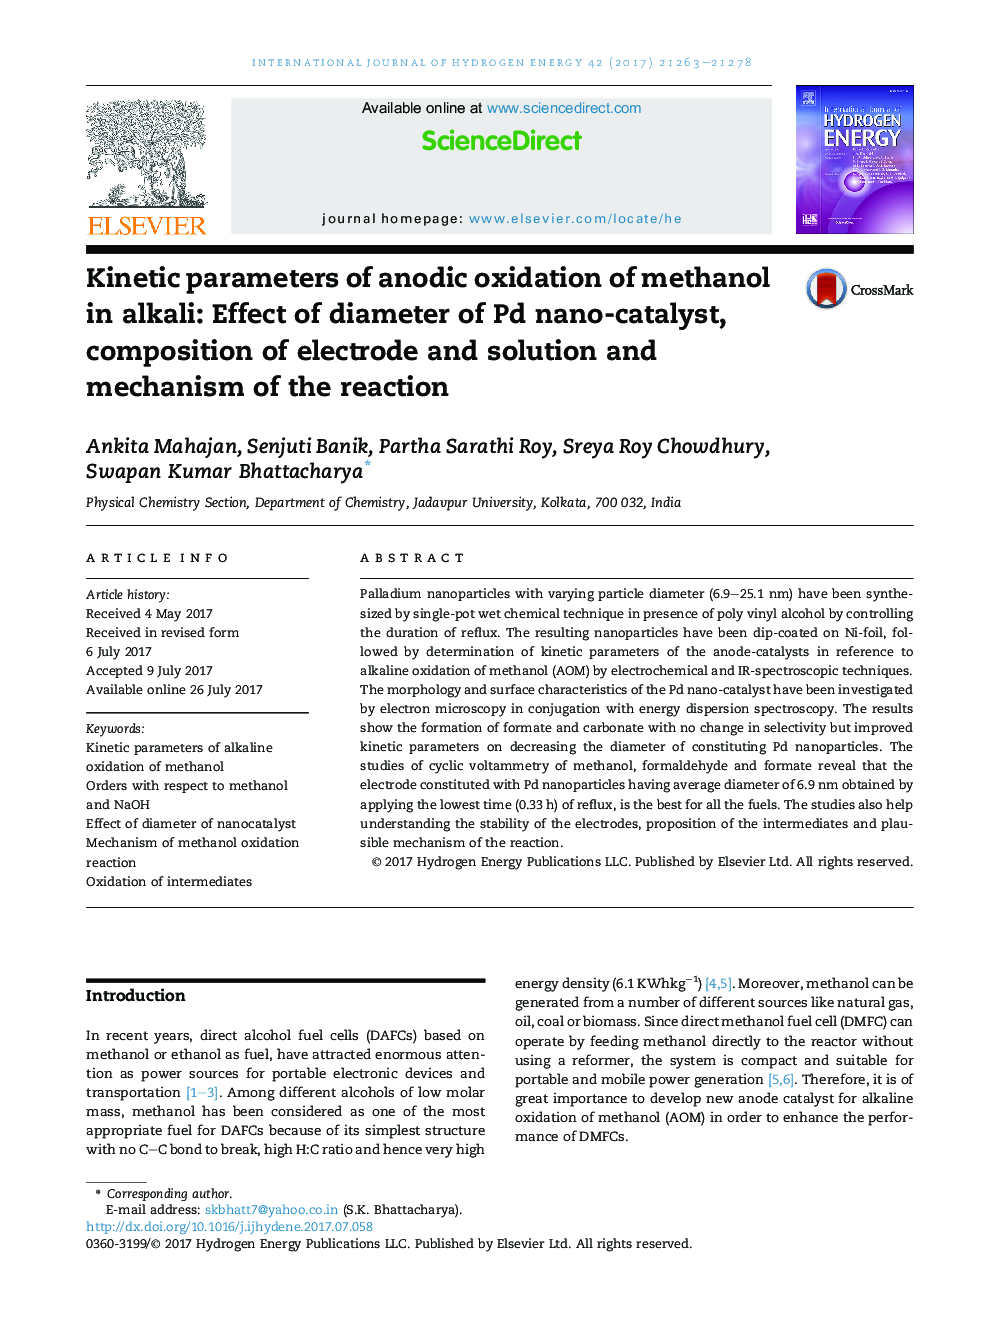 Kinetic parameters of anodic oxidation of methanol in alkali: Effect of diameter of Pd nano-catalyst, composition of electrode and solution and mechanism of the reaction